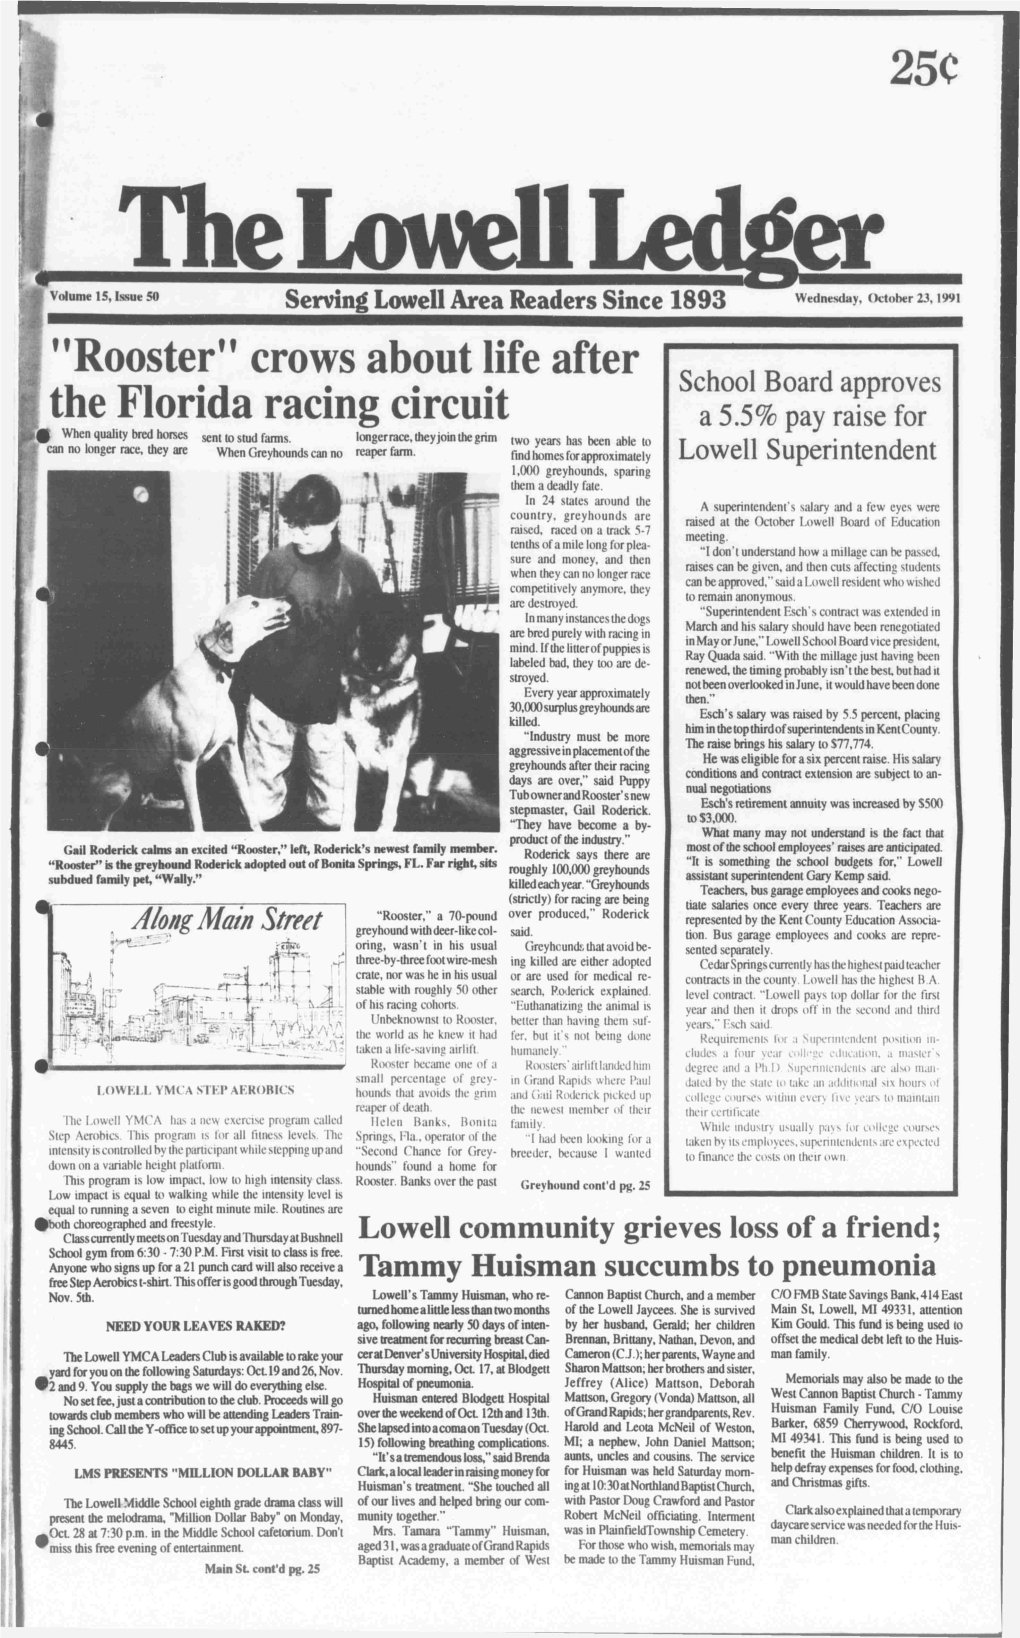 Rooster" Crows About Life After School Board Approves the Florida Racing Circuit a 5.5% Pay Raise for When Quality Bred Horses Sent to Stud Faims